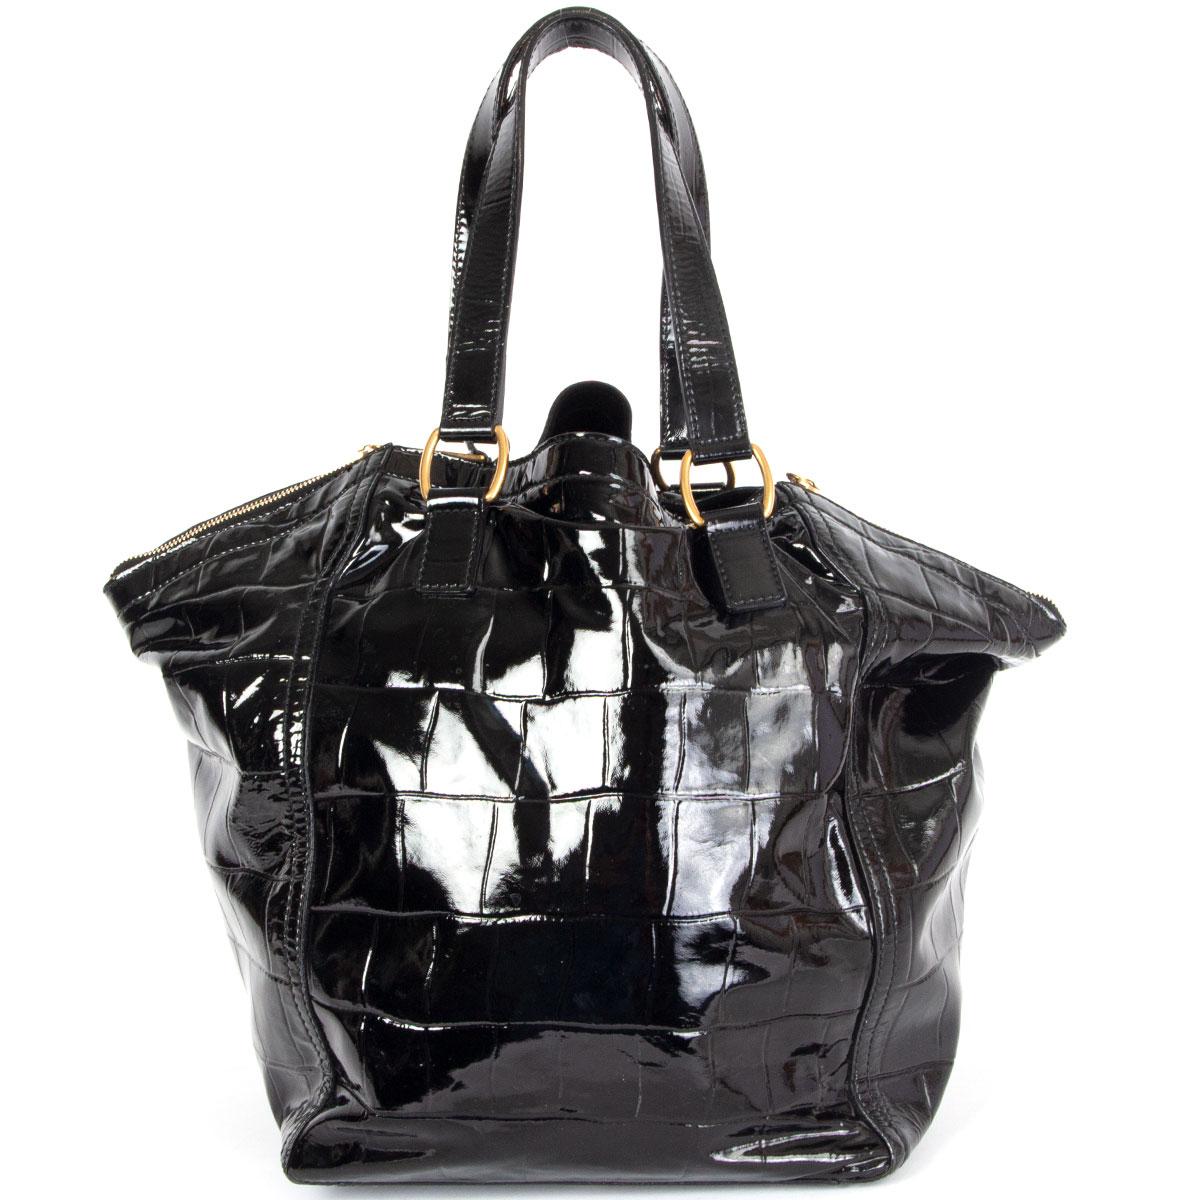 ysl patent leather bag